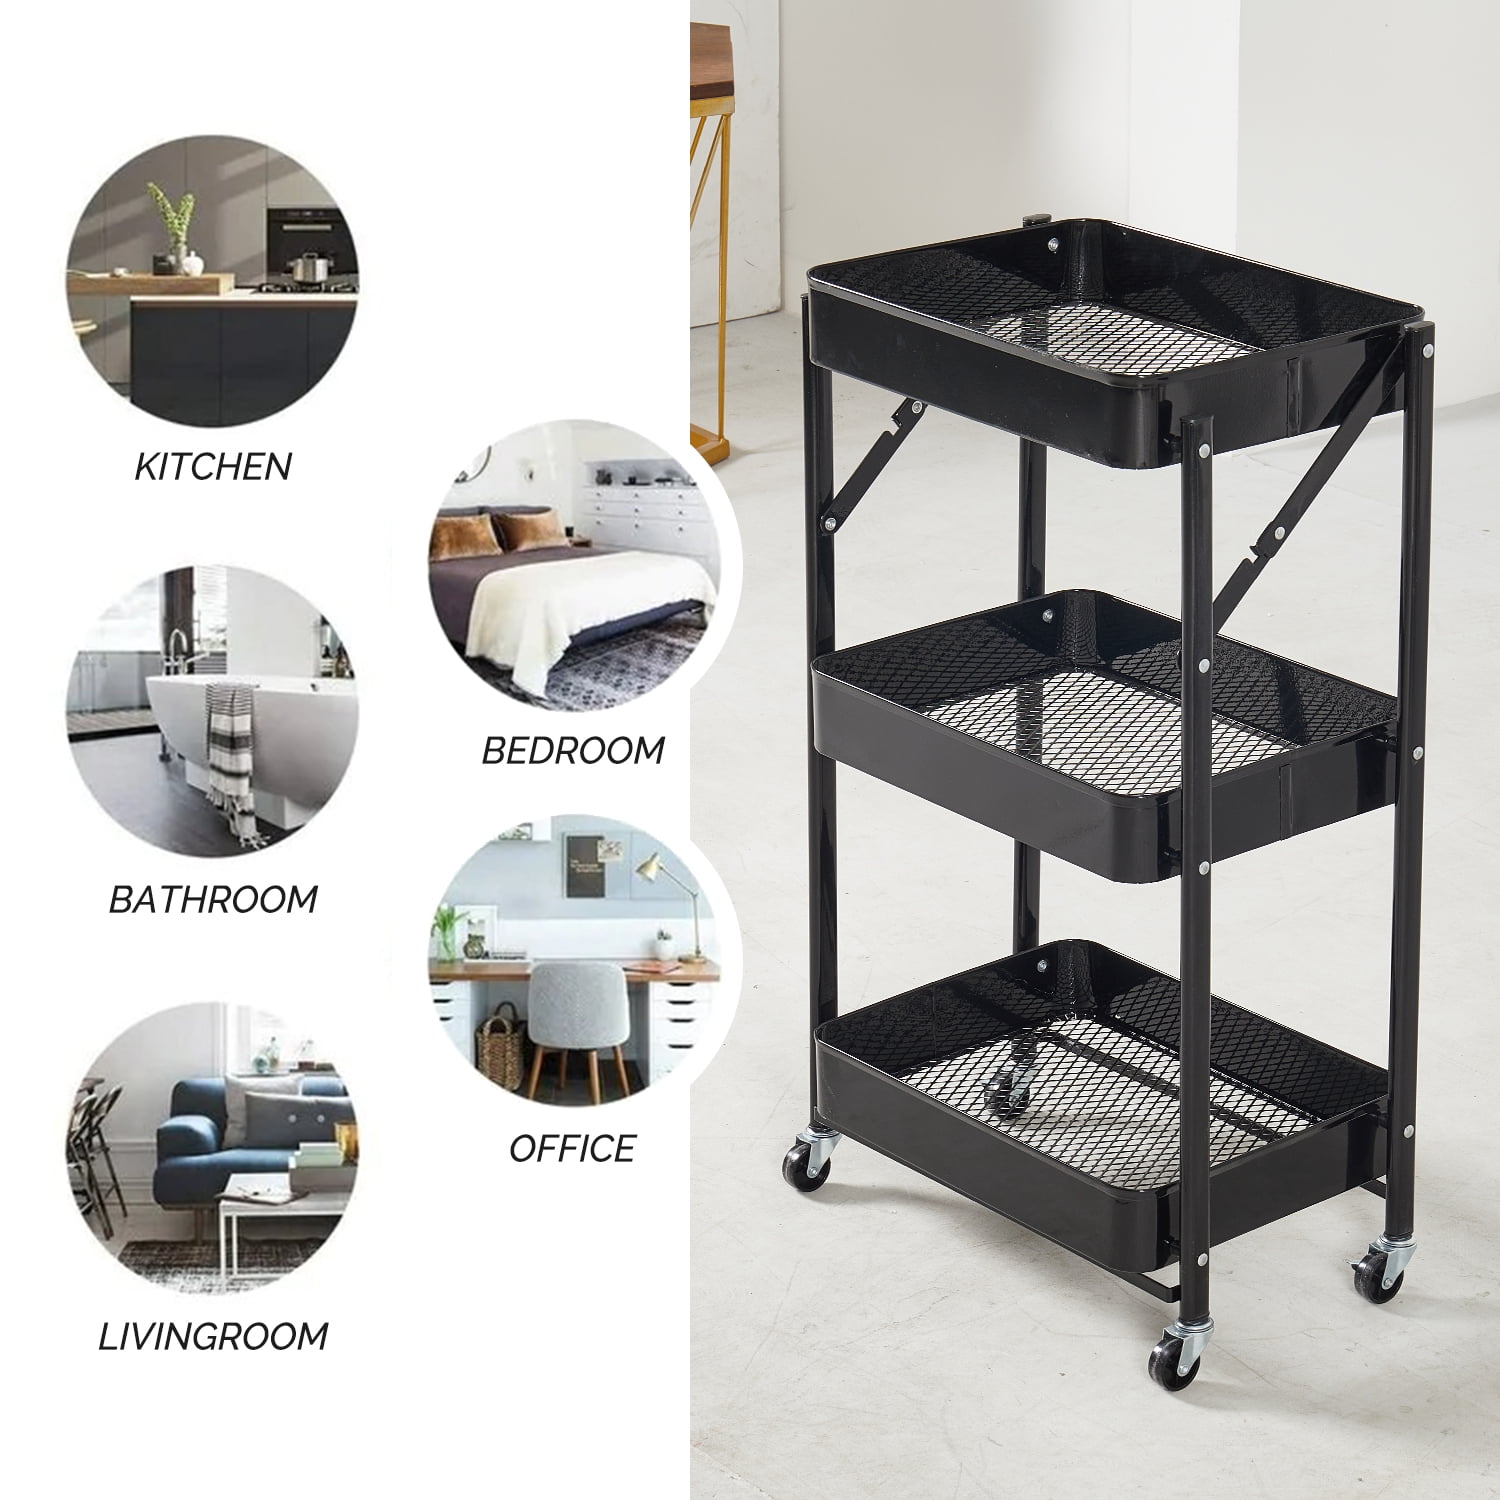 Details about   3-Tier Metal Rolling Utility Cart Mobile Storage Organizer Holder Trolley Cart 